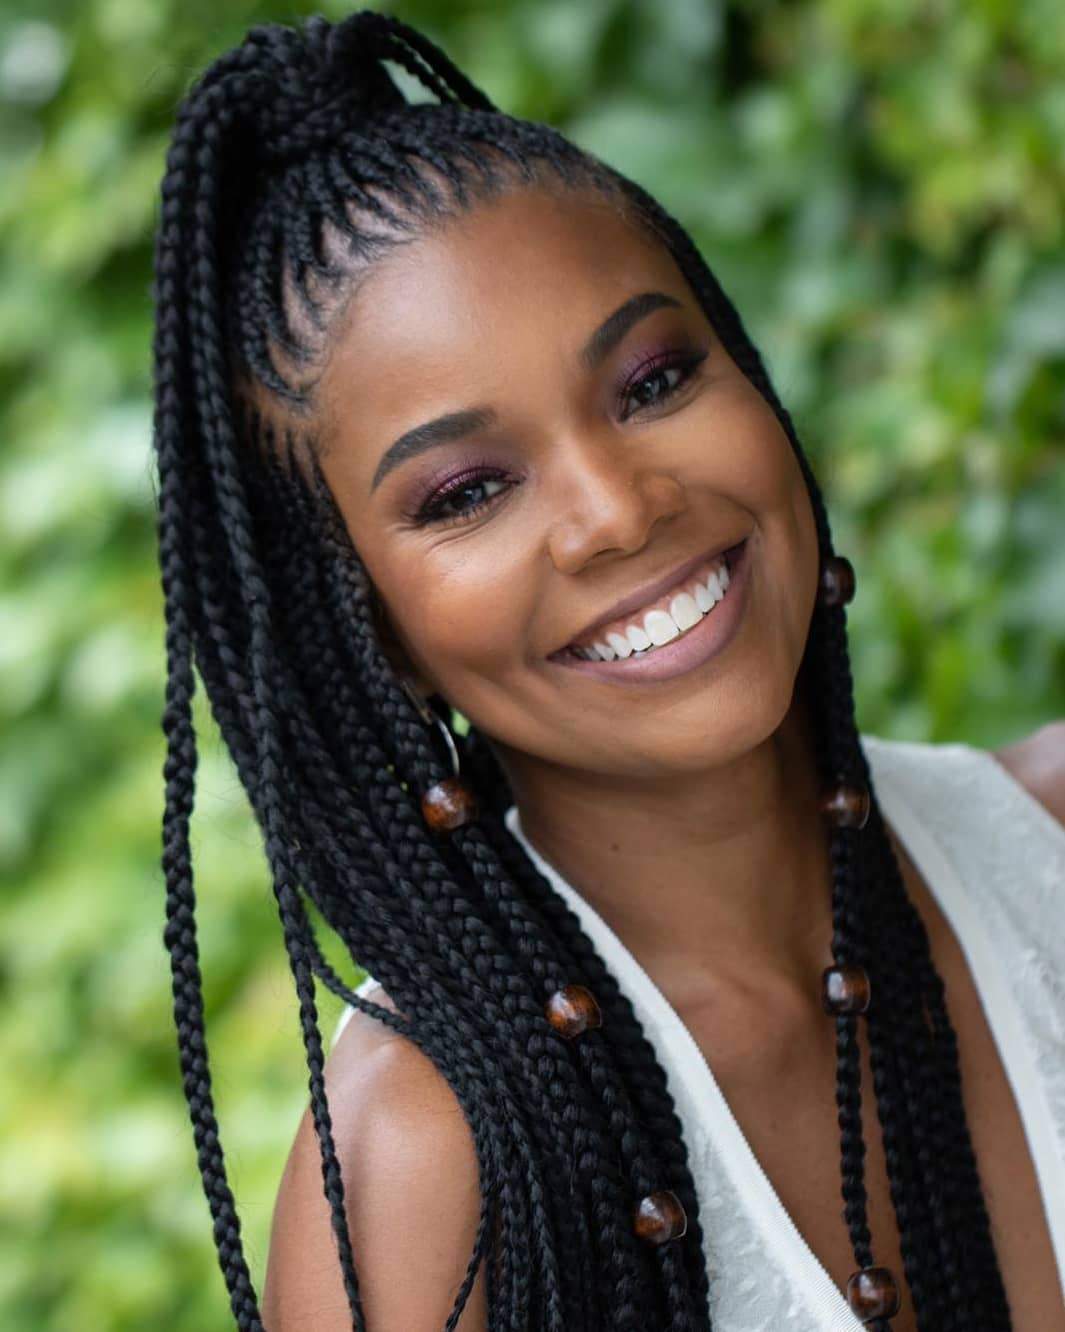 Here are 3 Ways to Rock Your Braids this Summer - According to Gabrielle Union-Wade!